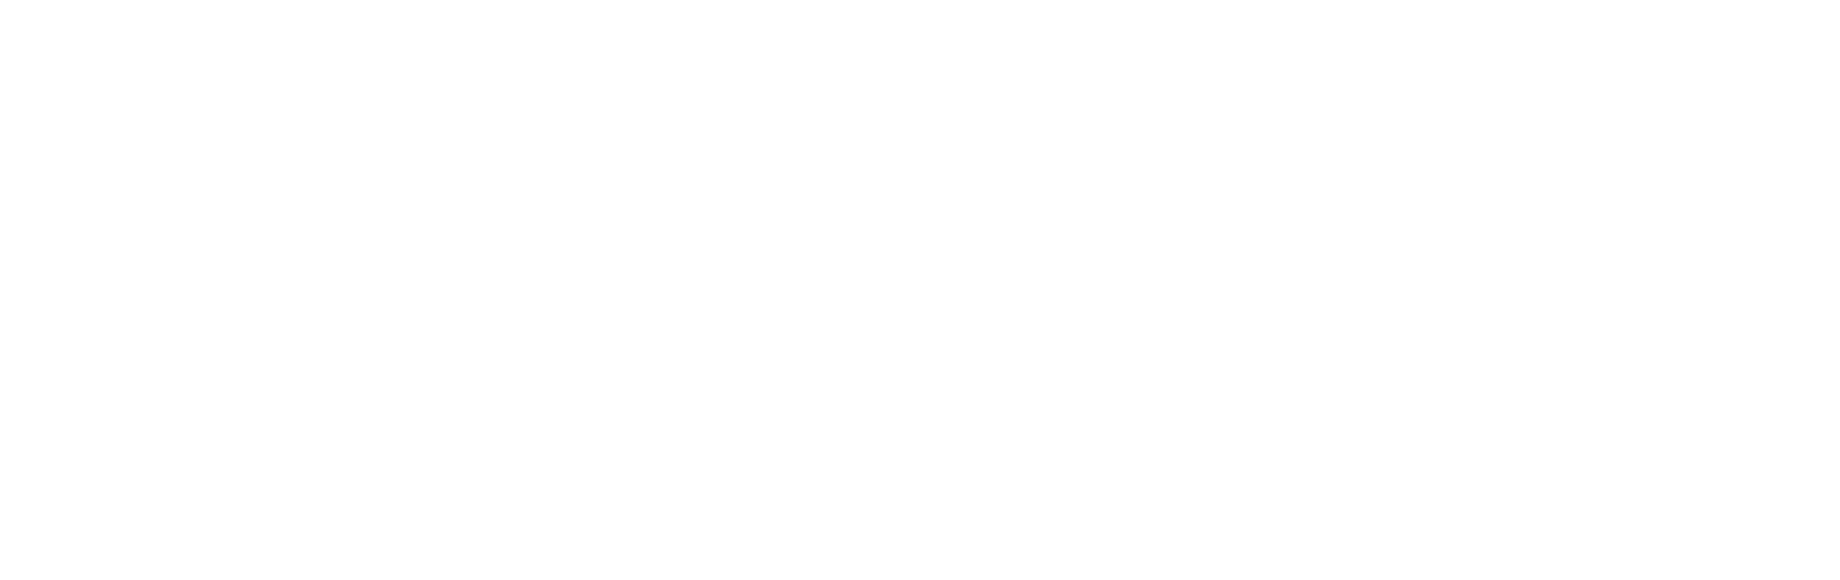 white wesbell investment recovery logo